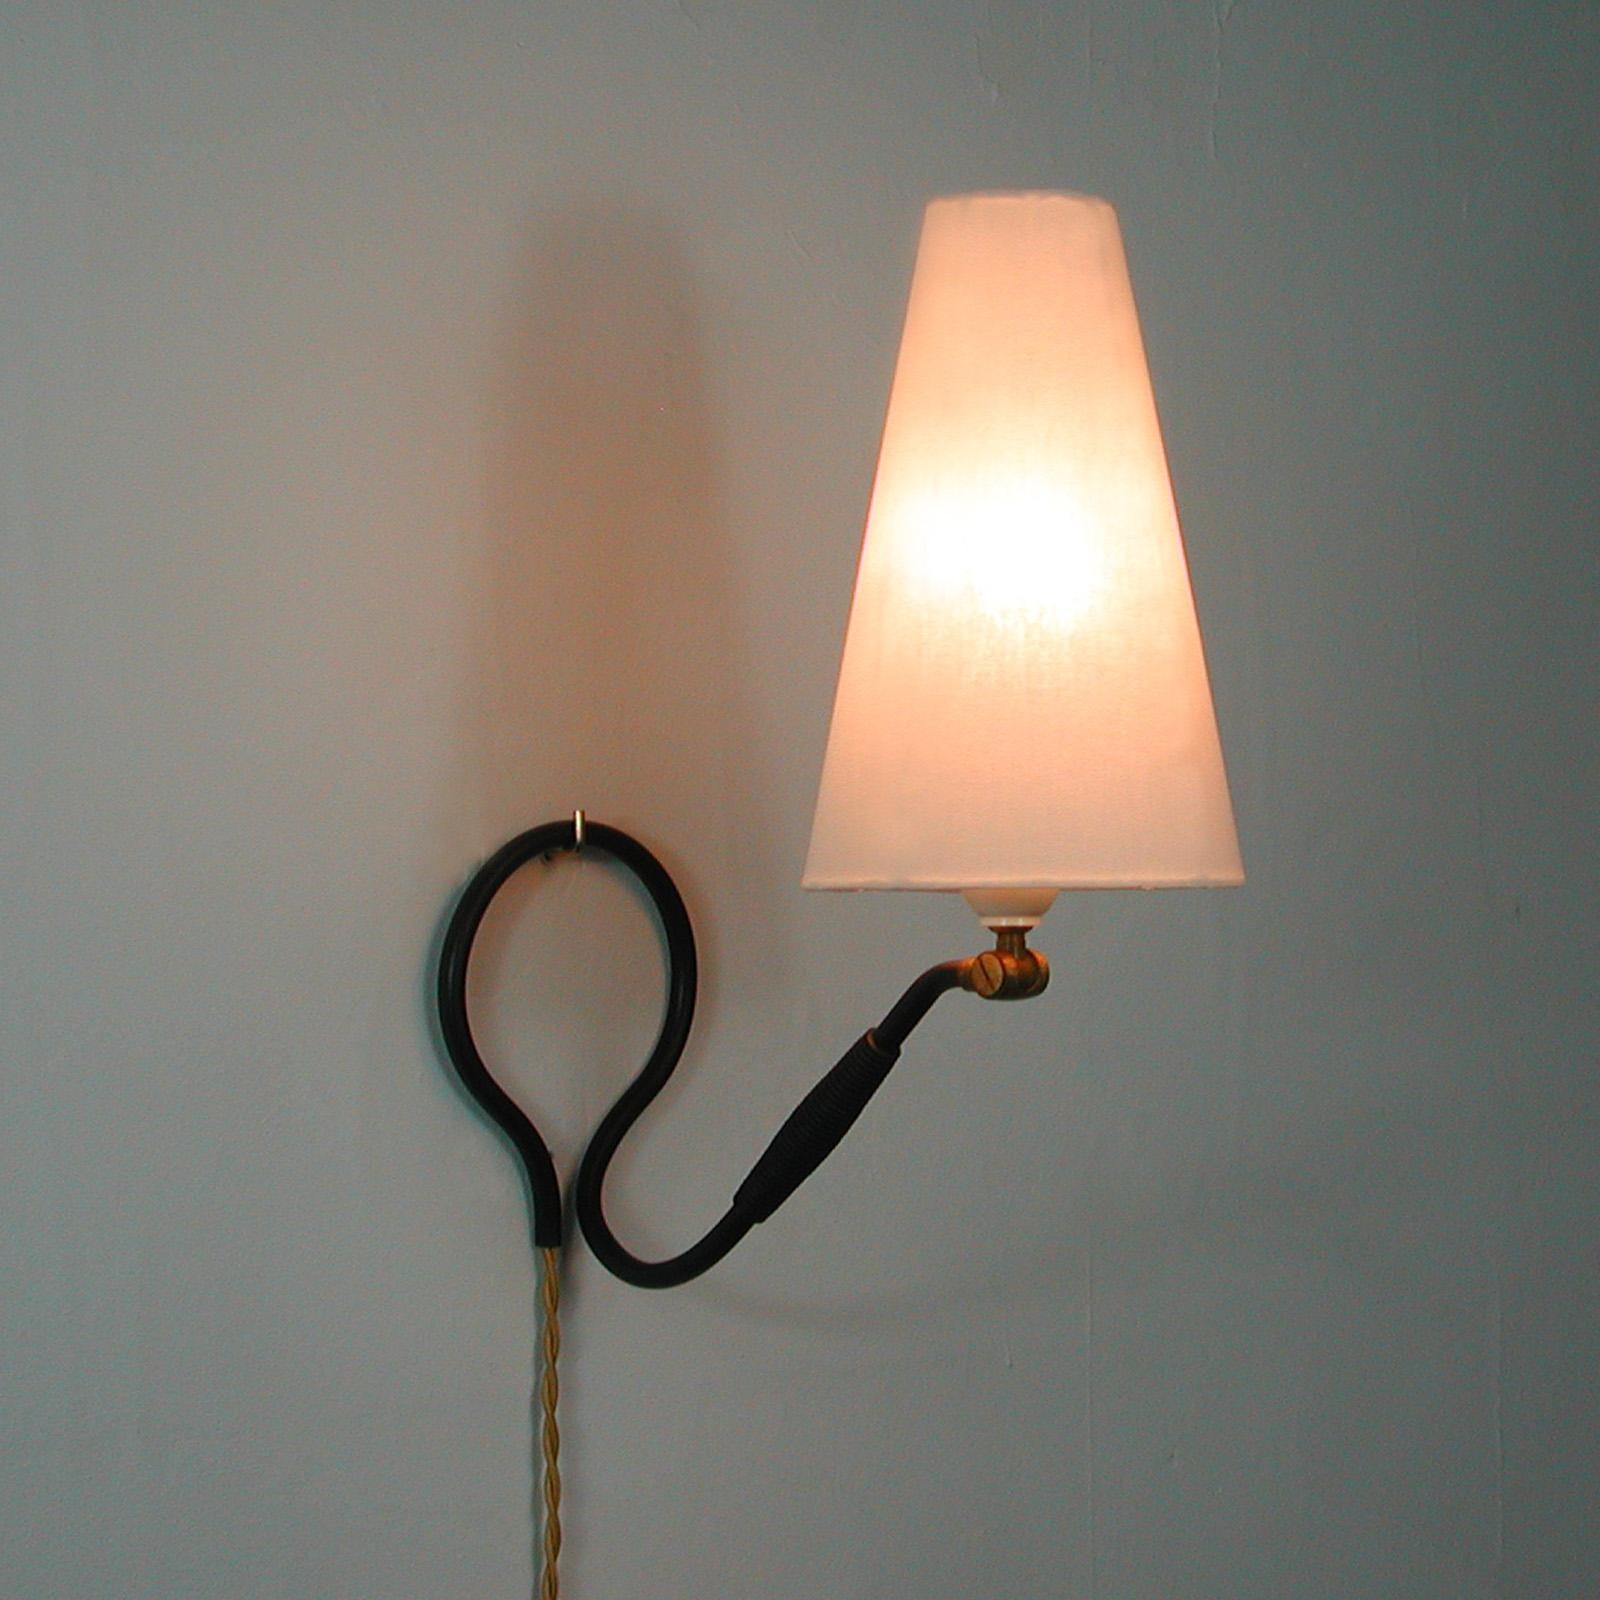 Adjustable Black Brass and Bakelite Wall or Table Lamp 306 by Kaare Klint, 1950s For Sale 4